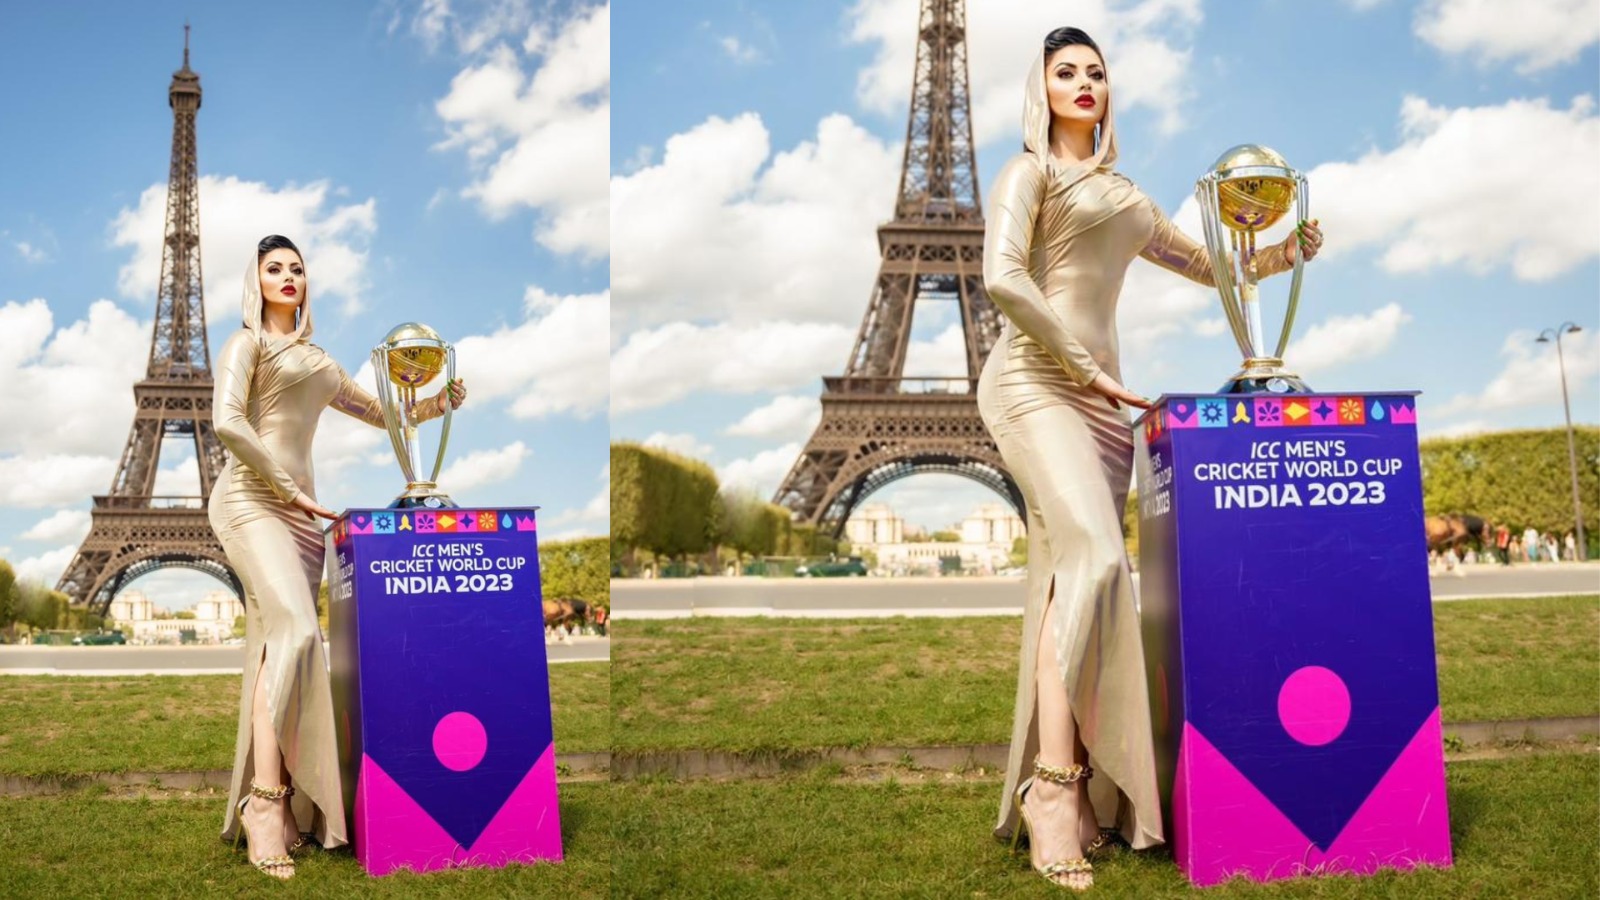 Urvashi Rautela becomes the first actor to unveil  Cricket World Cup 2023 Trophy in front of the Eiffel Tower!